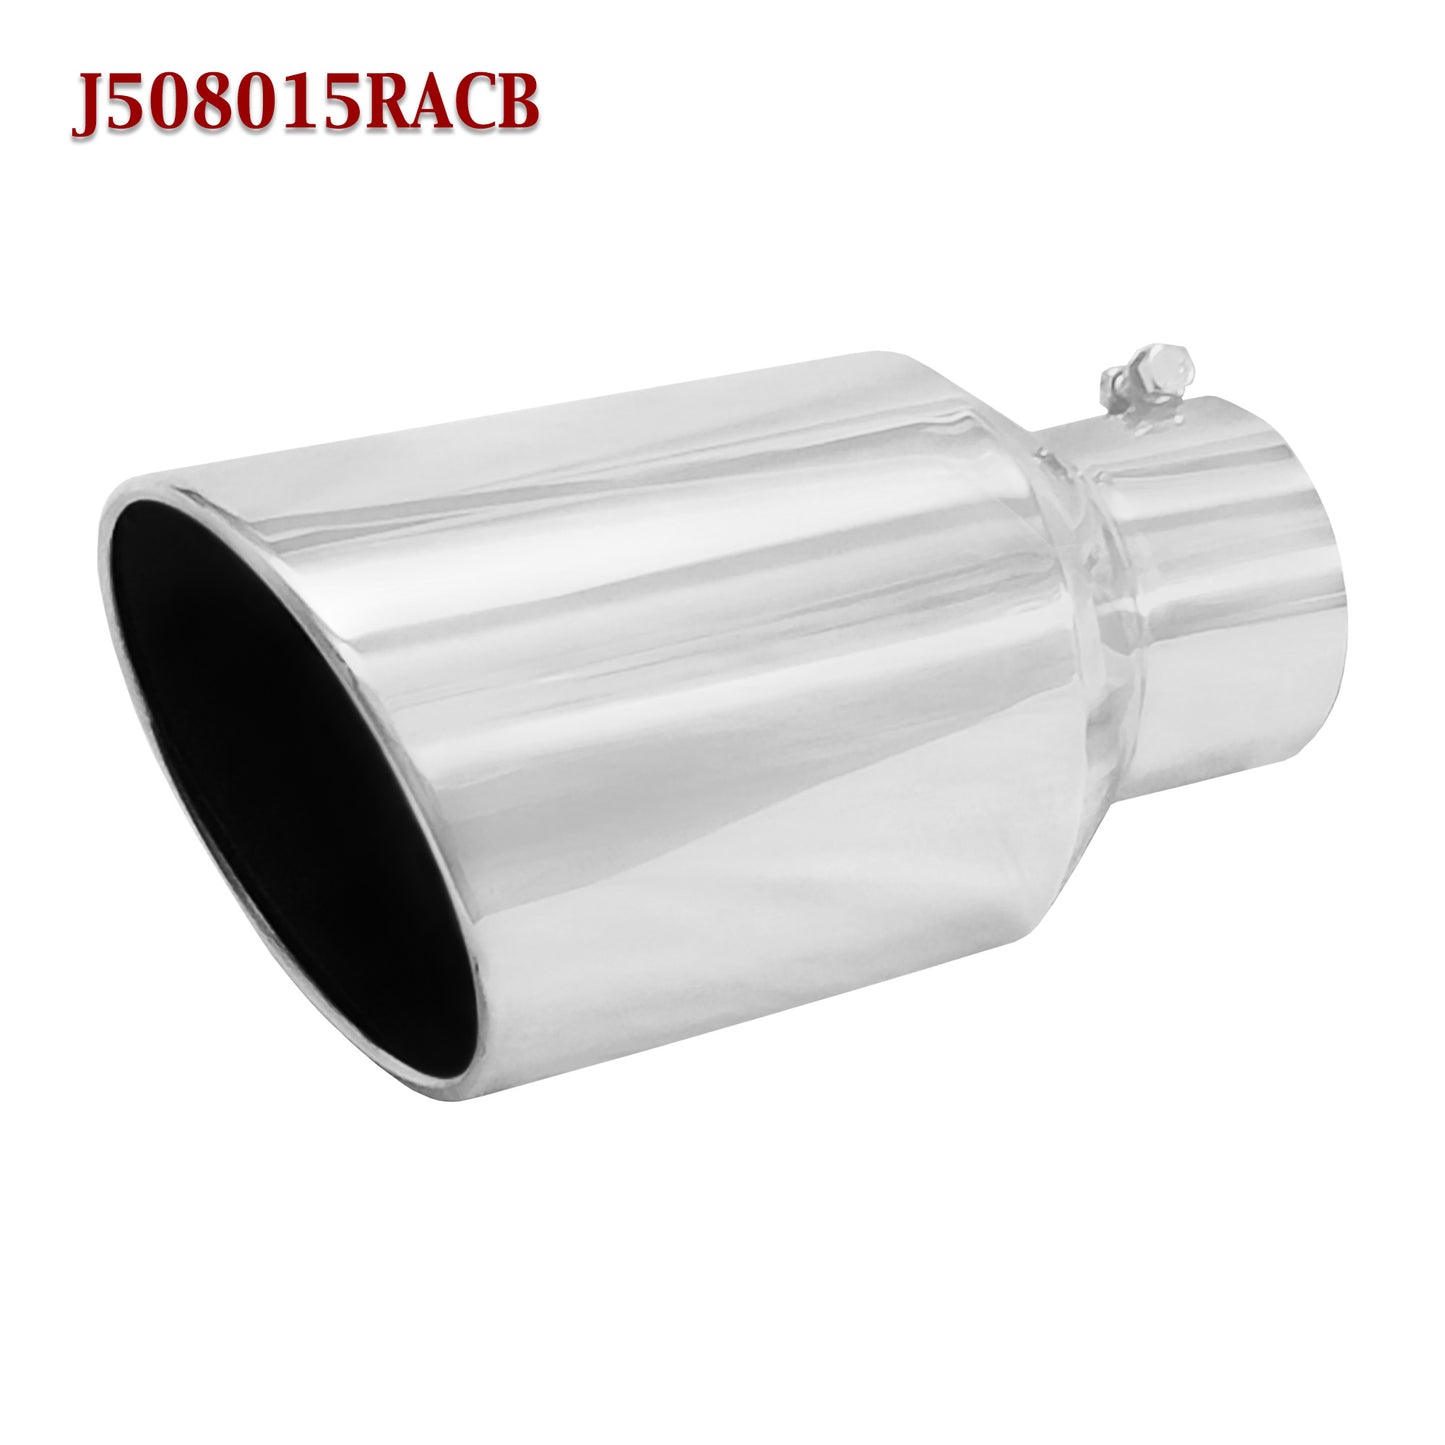 J508015RACB 5" Stainless Round Diesel Truck Bolt Exhaust Tip 8" Outlet 15" Long